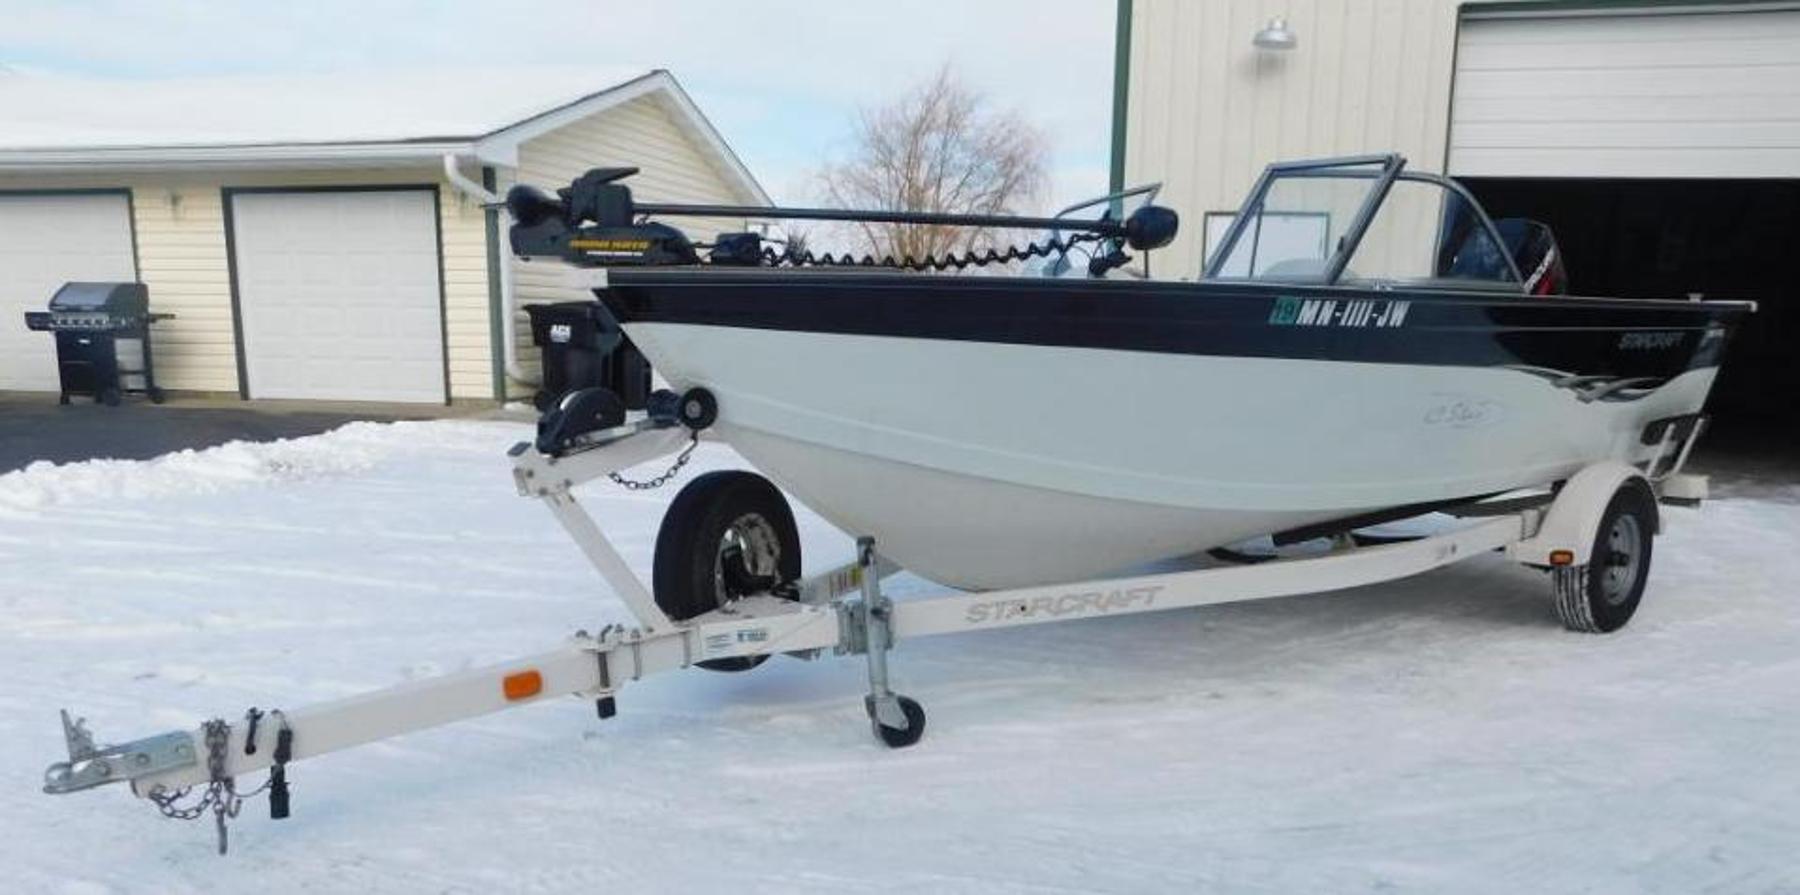 Moving Auction: 2004 Starcraft Boat, Shop Equipment, Lawn & Garden, Sporting Goods and Household